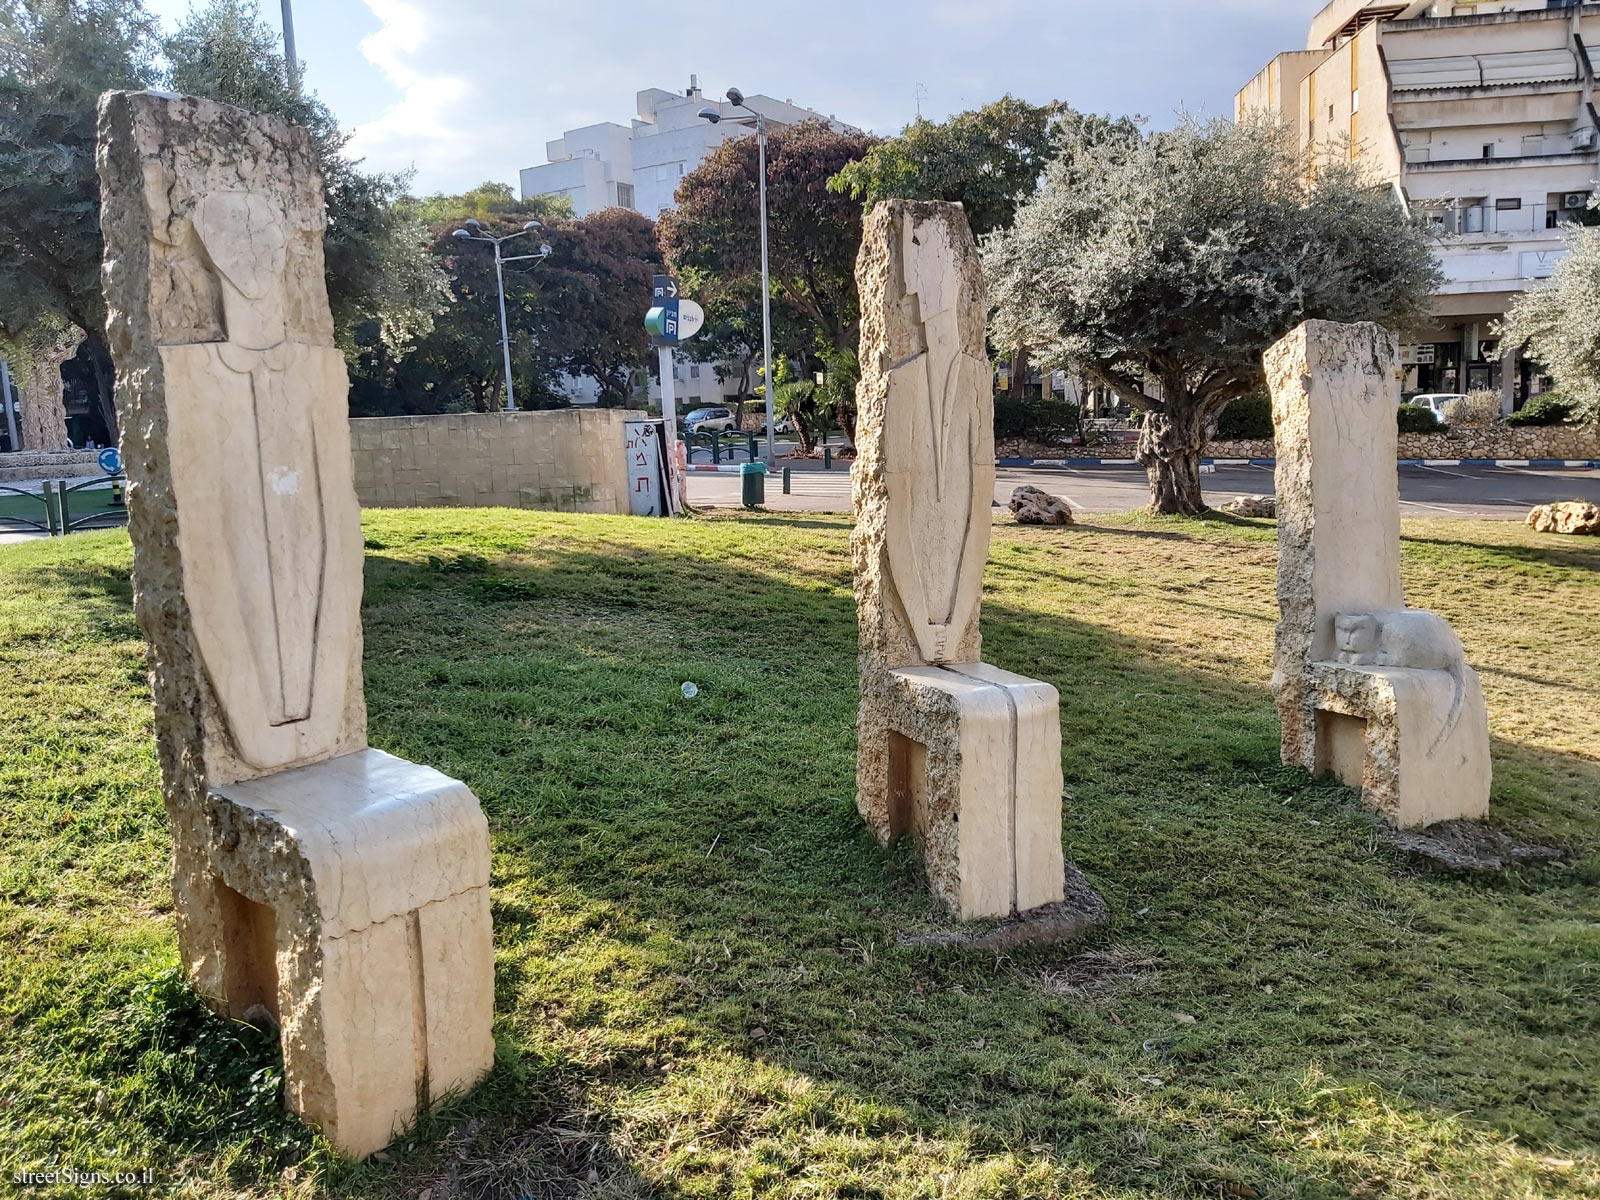 "Three Chairs and a Cat" - an outdoor sculpture by Varda Givoli and Ilan Gelber - Ahuza/Ben Gurion, Ra’anana, Israel